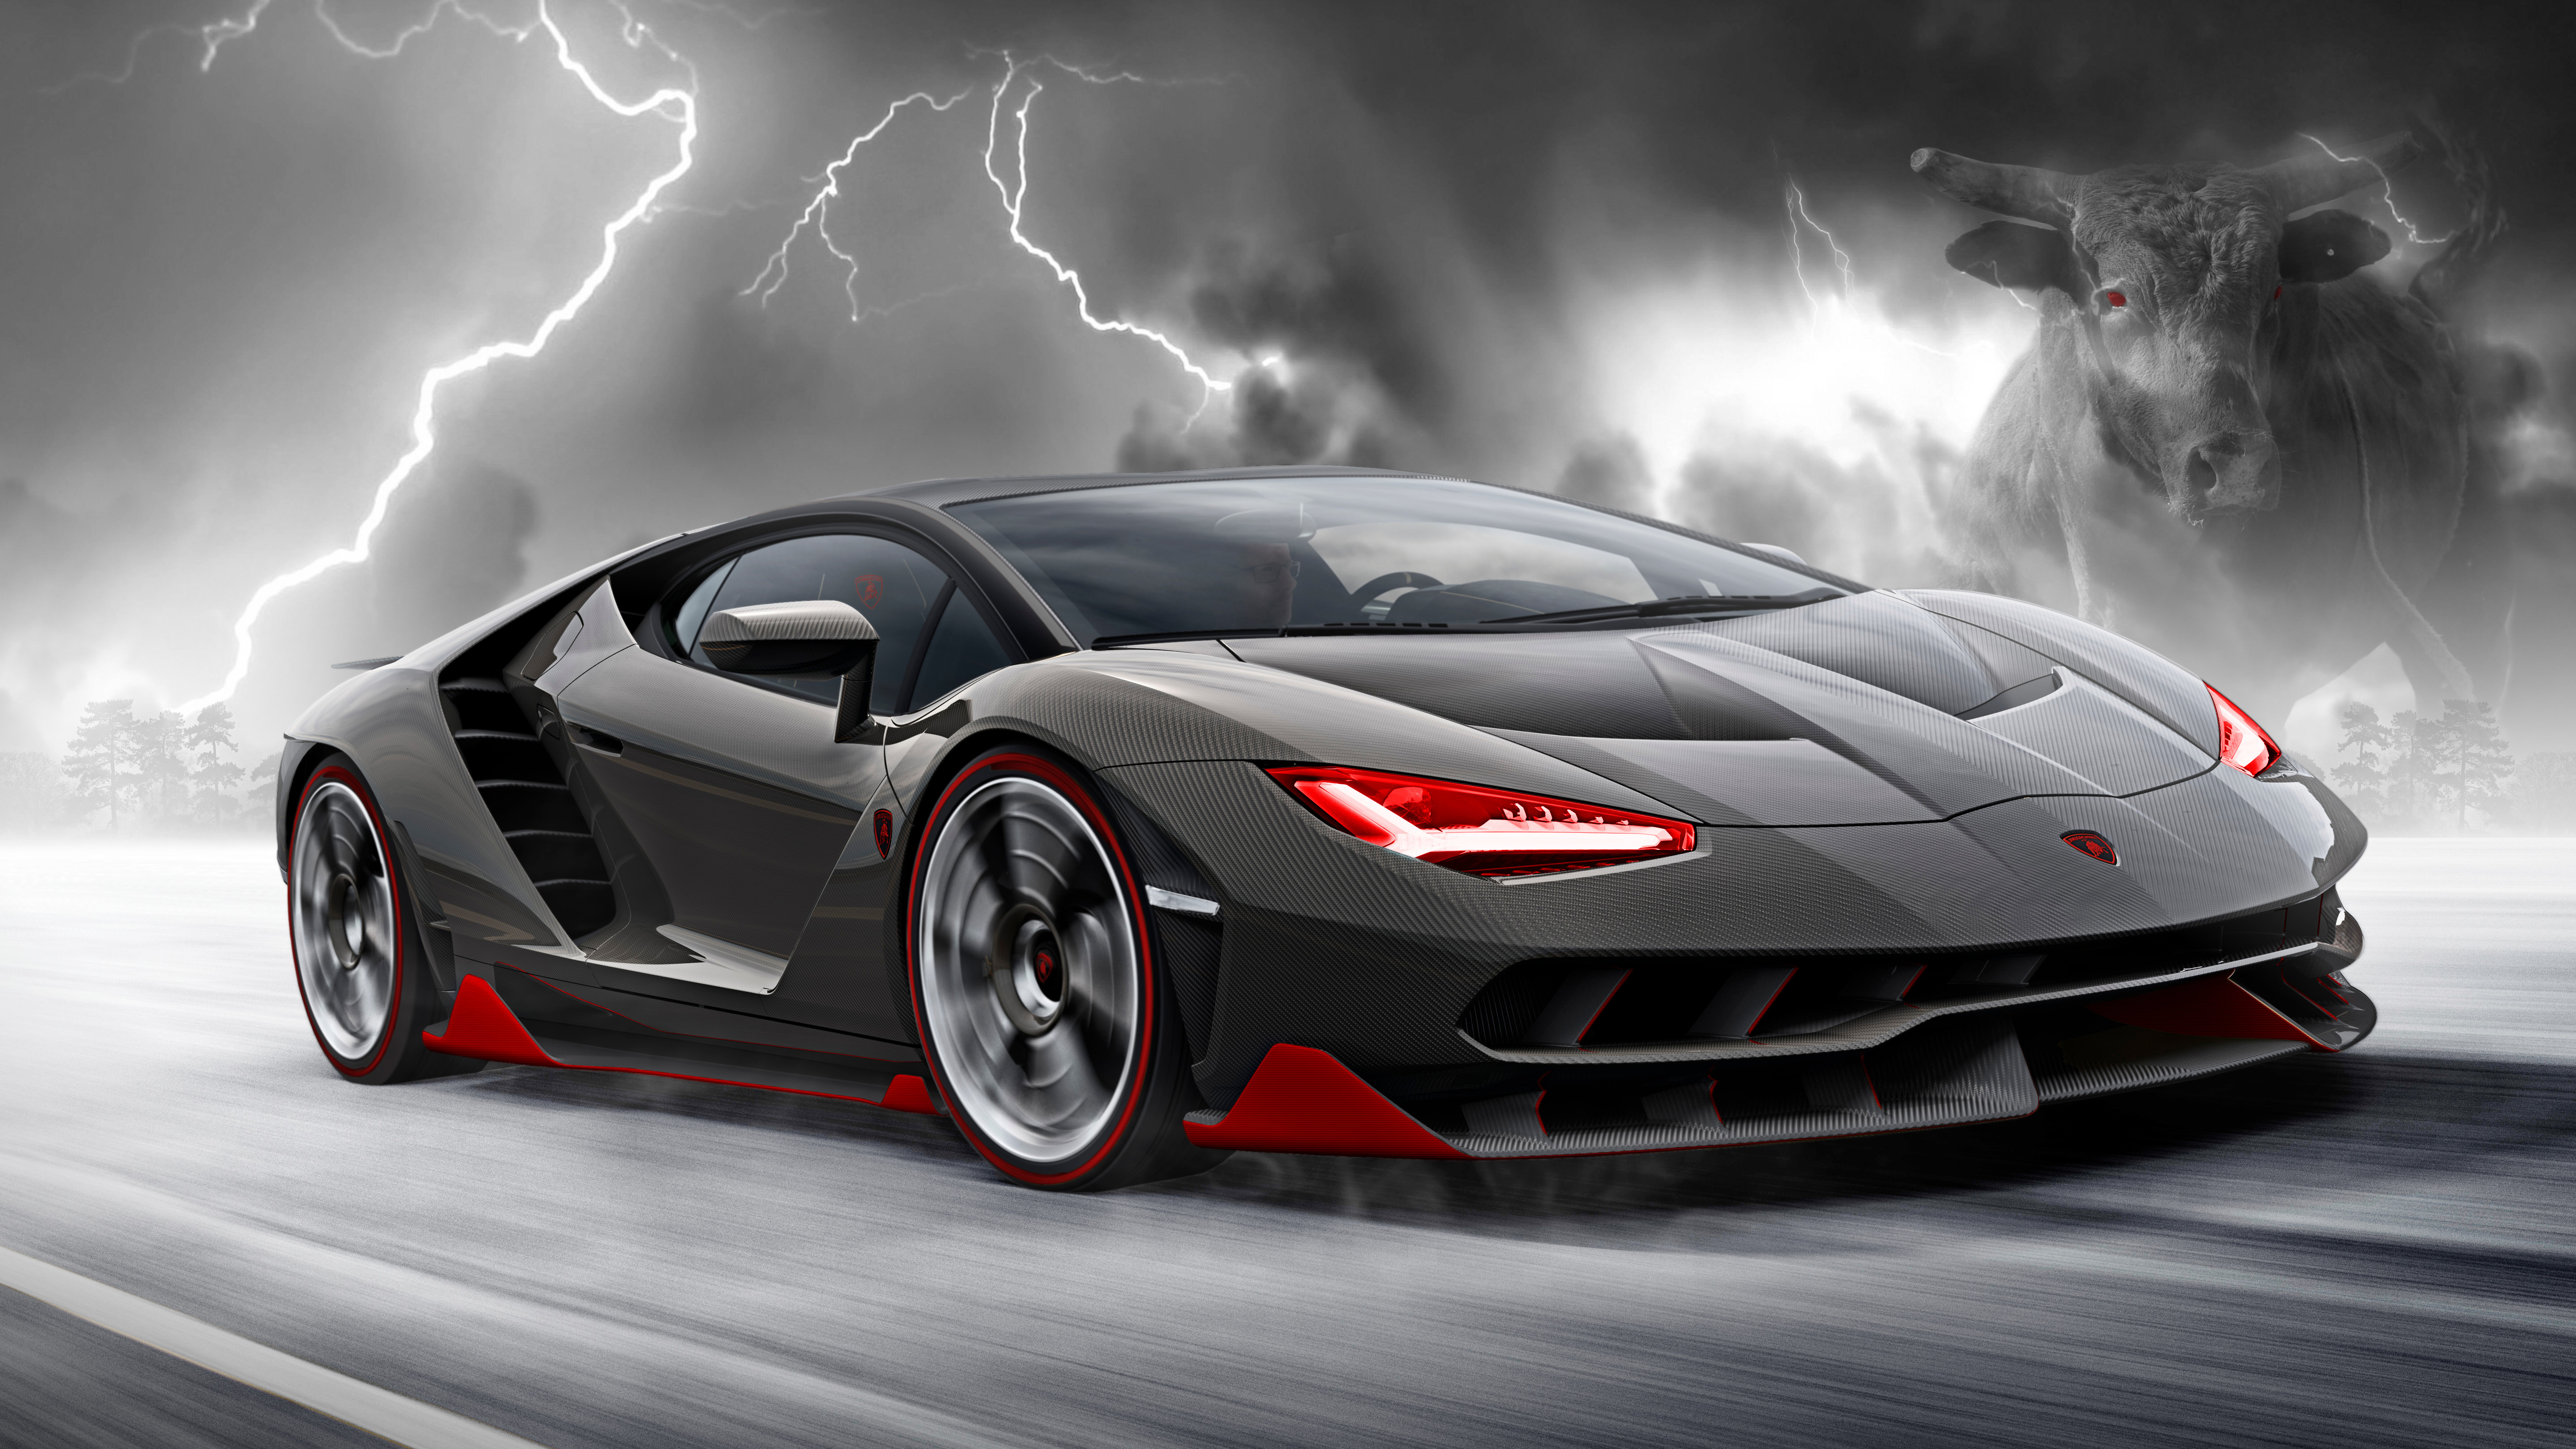 Super Fast Cars Wallpapers (64+ images)